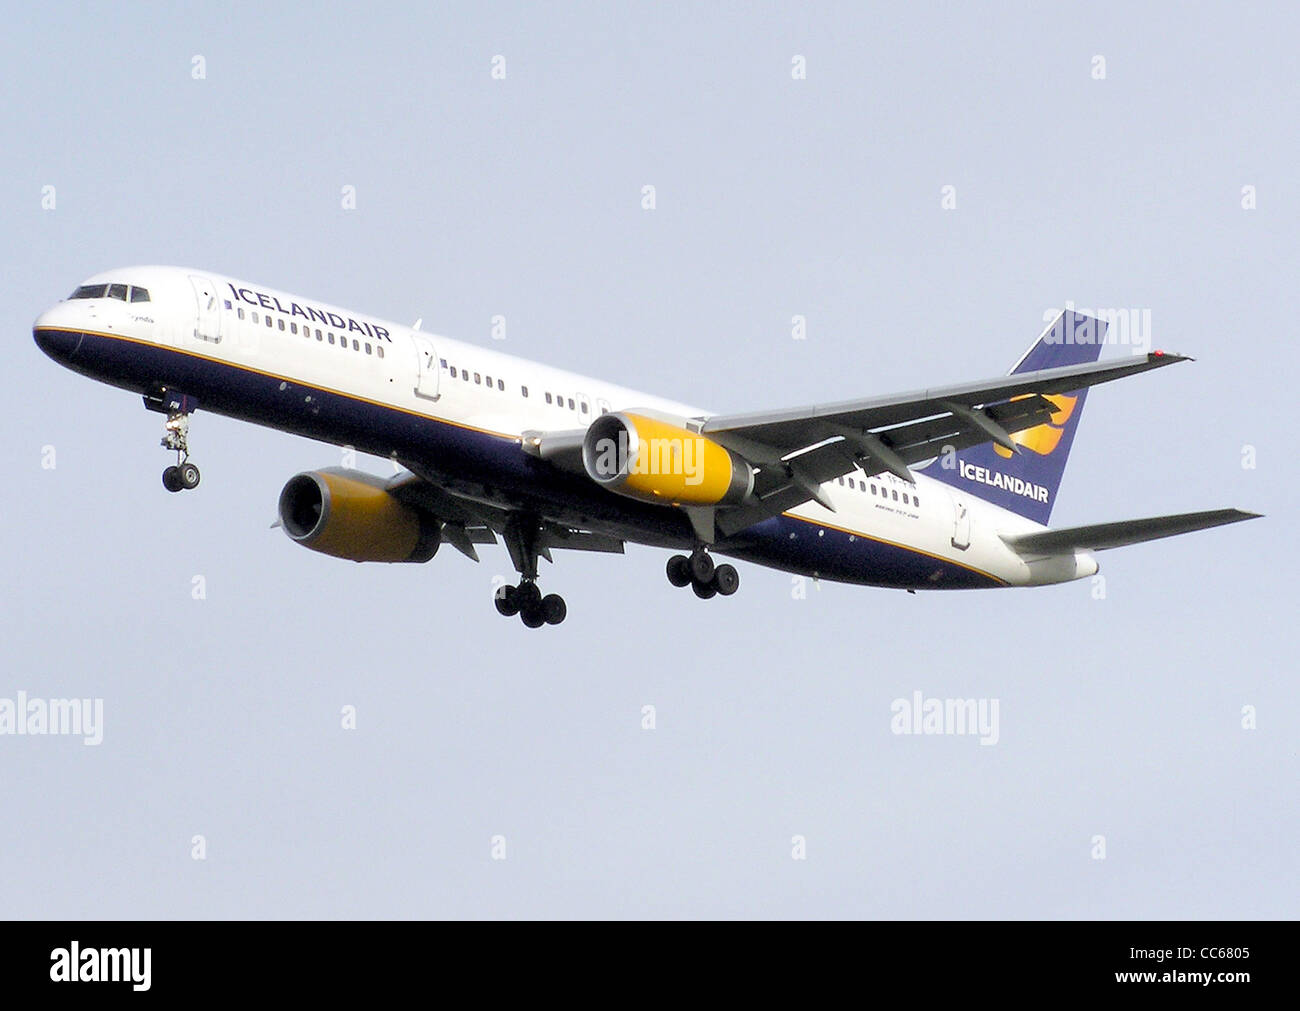 Icelandair Boeing 757-200 (TF-FIN), named 'Bryndis', landing at London Heathrow Airport, England. Stock Photo